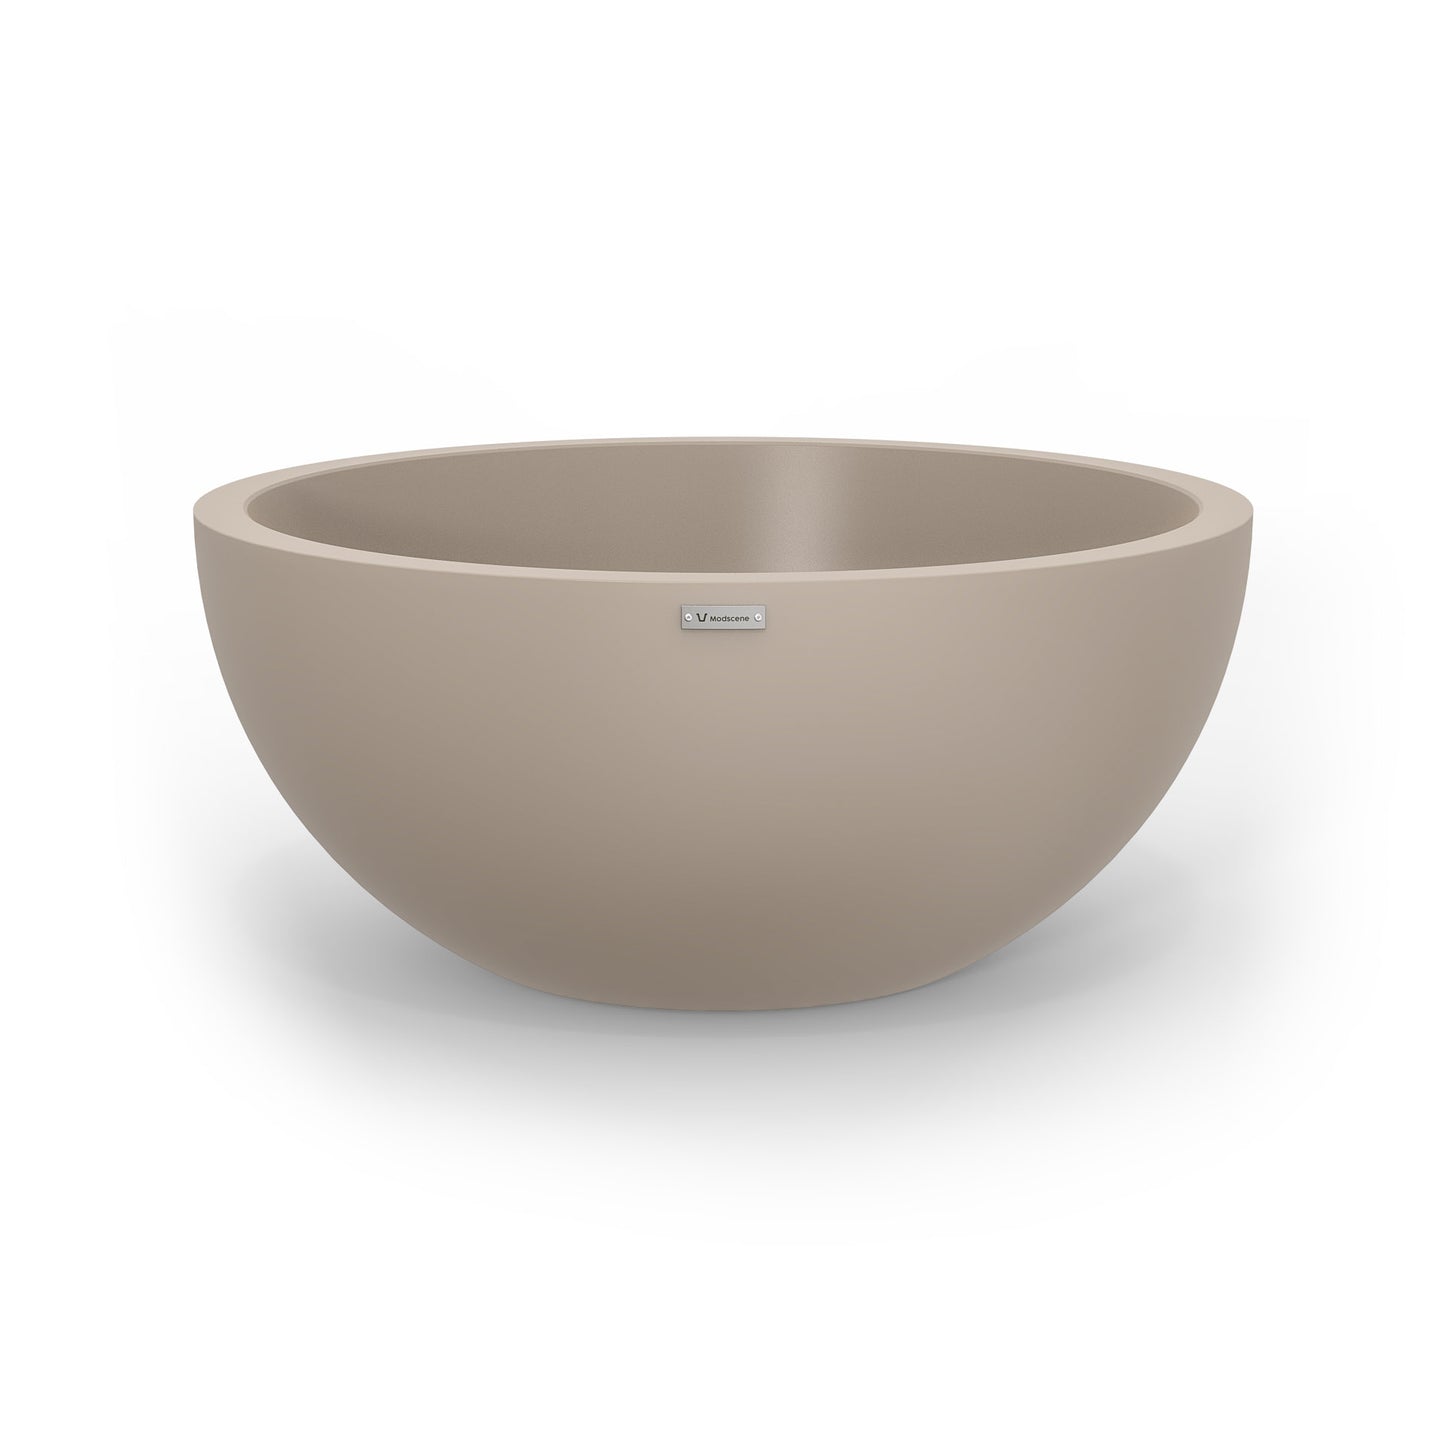 A large Modscene planter bowl in a sand stone colour.